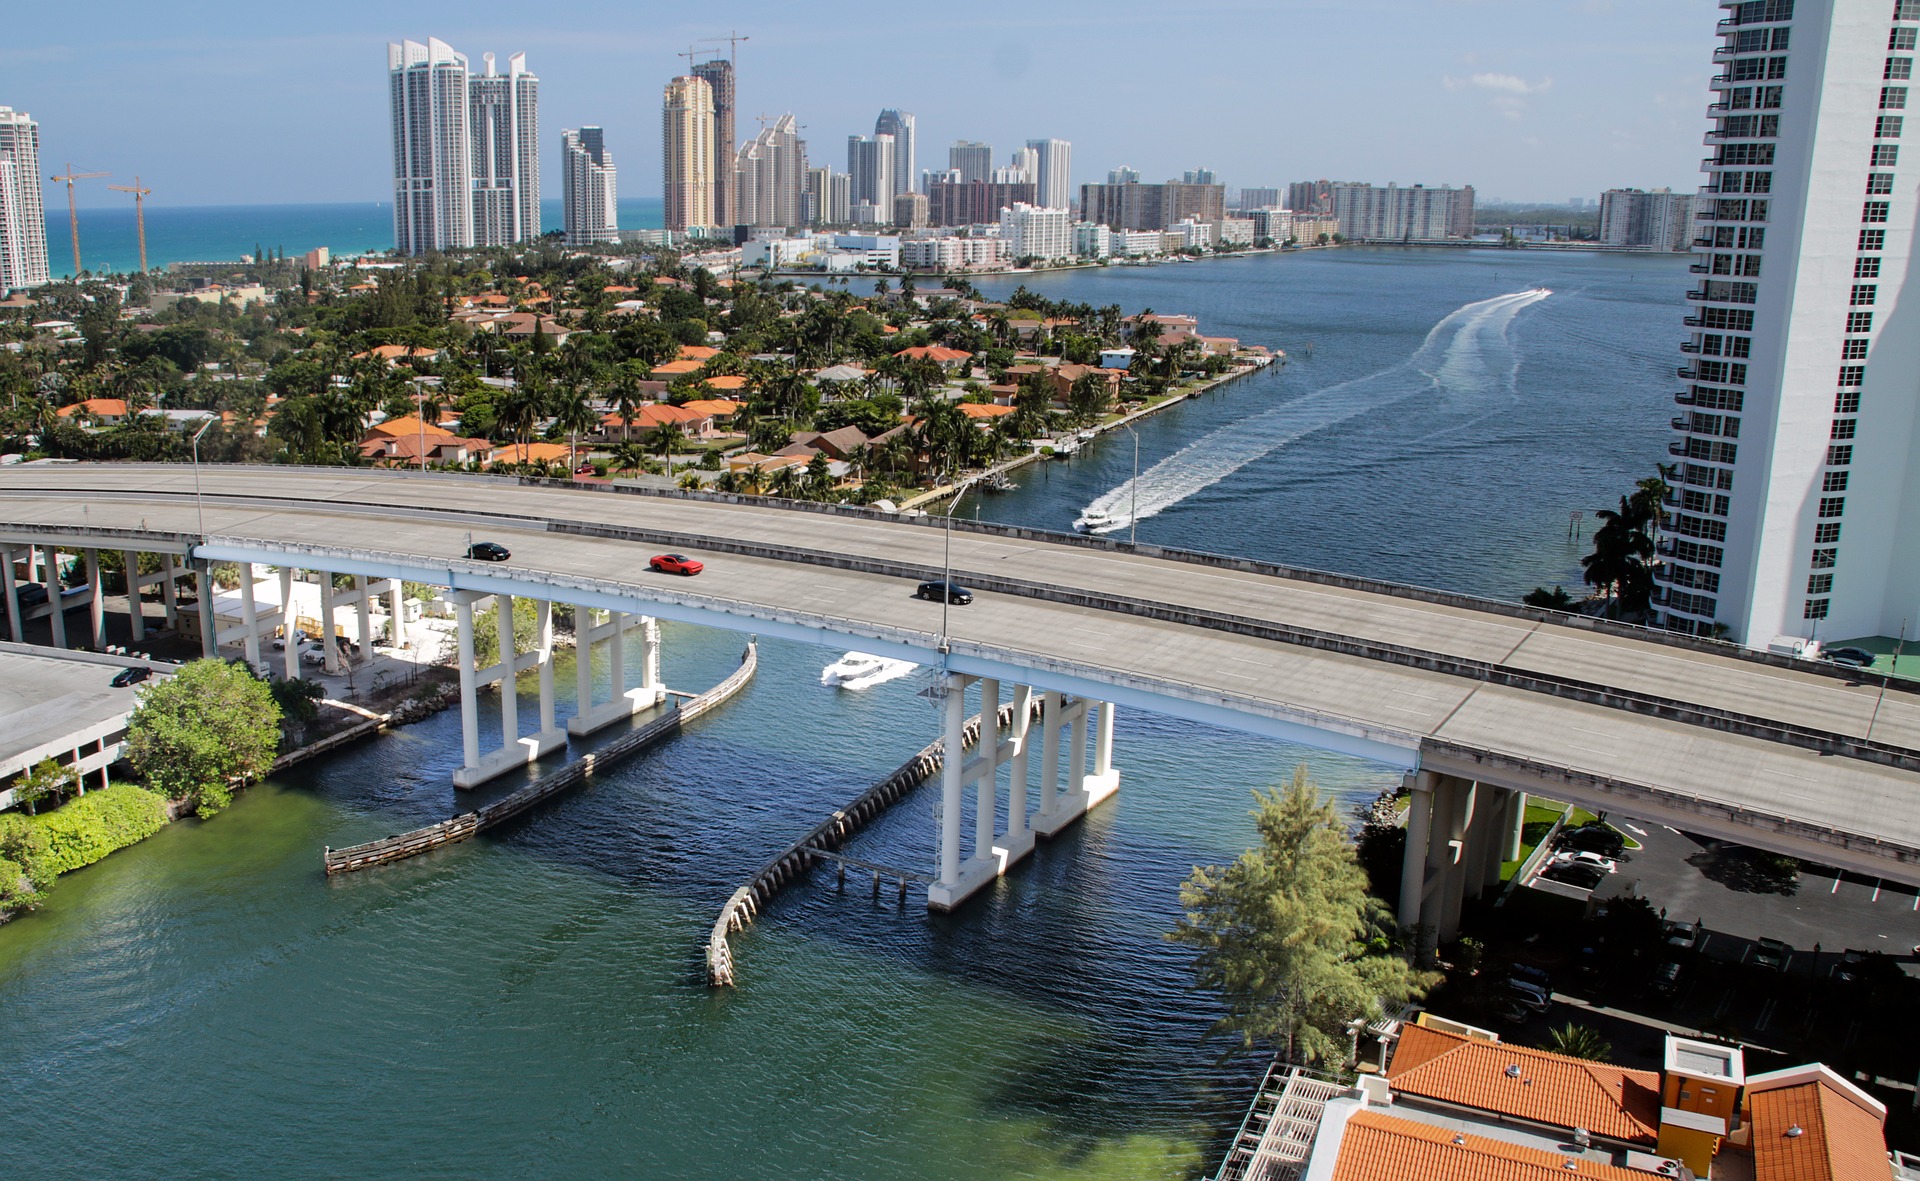 What Types of Views to Expect from Your Miami Condo